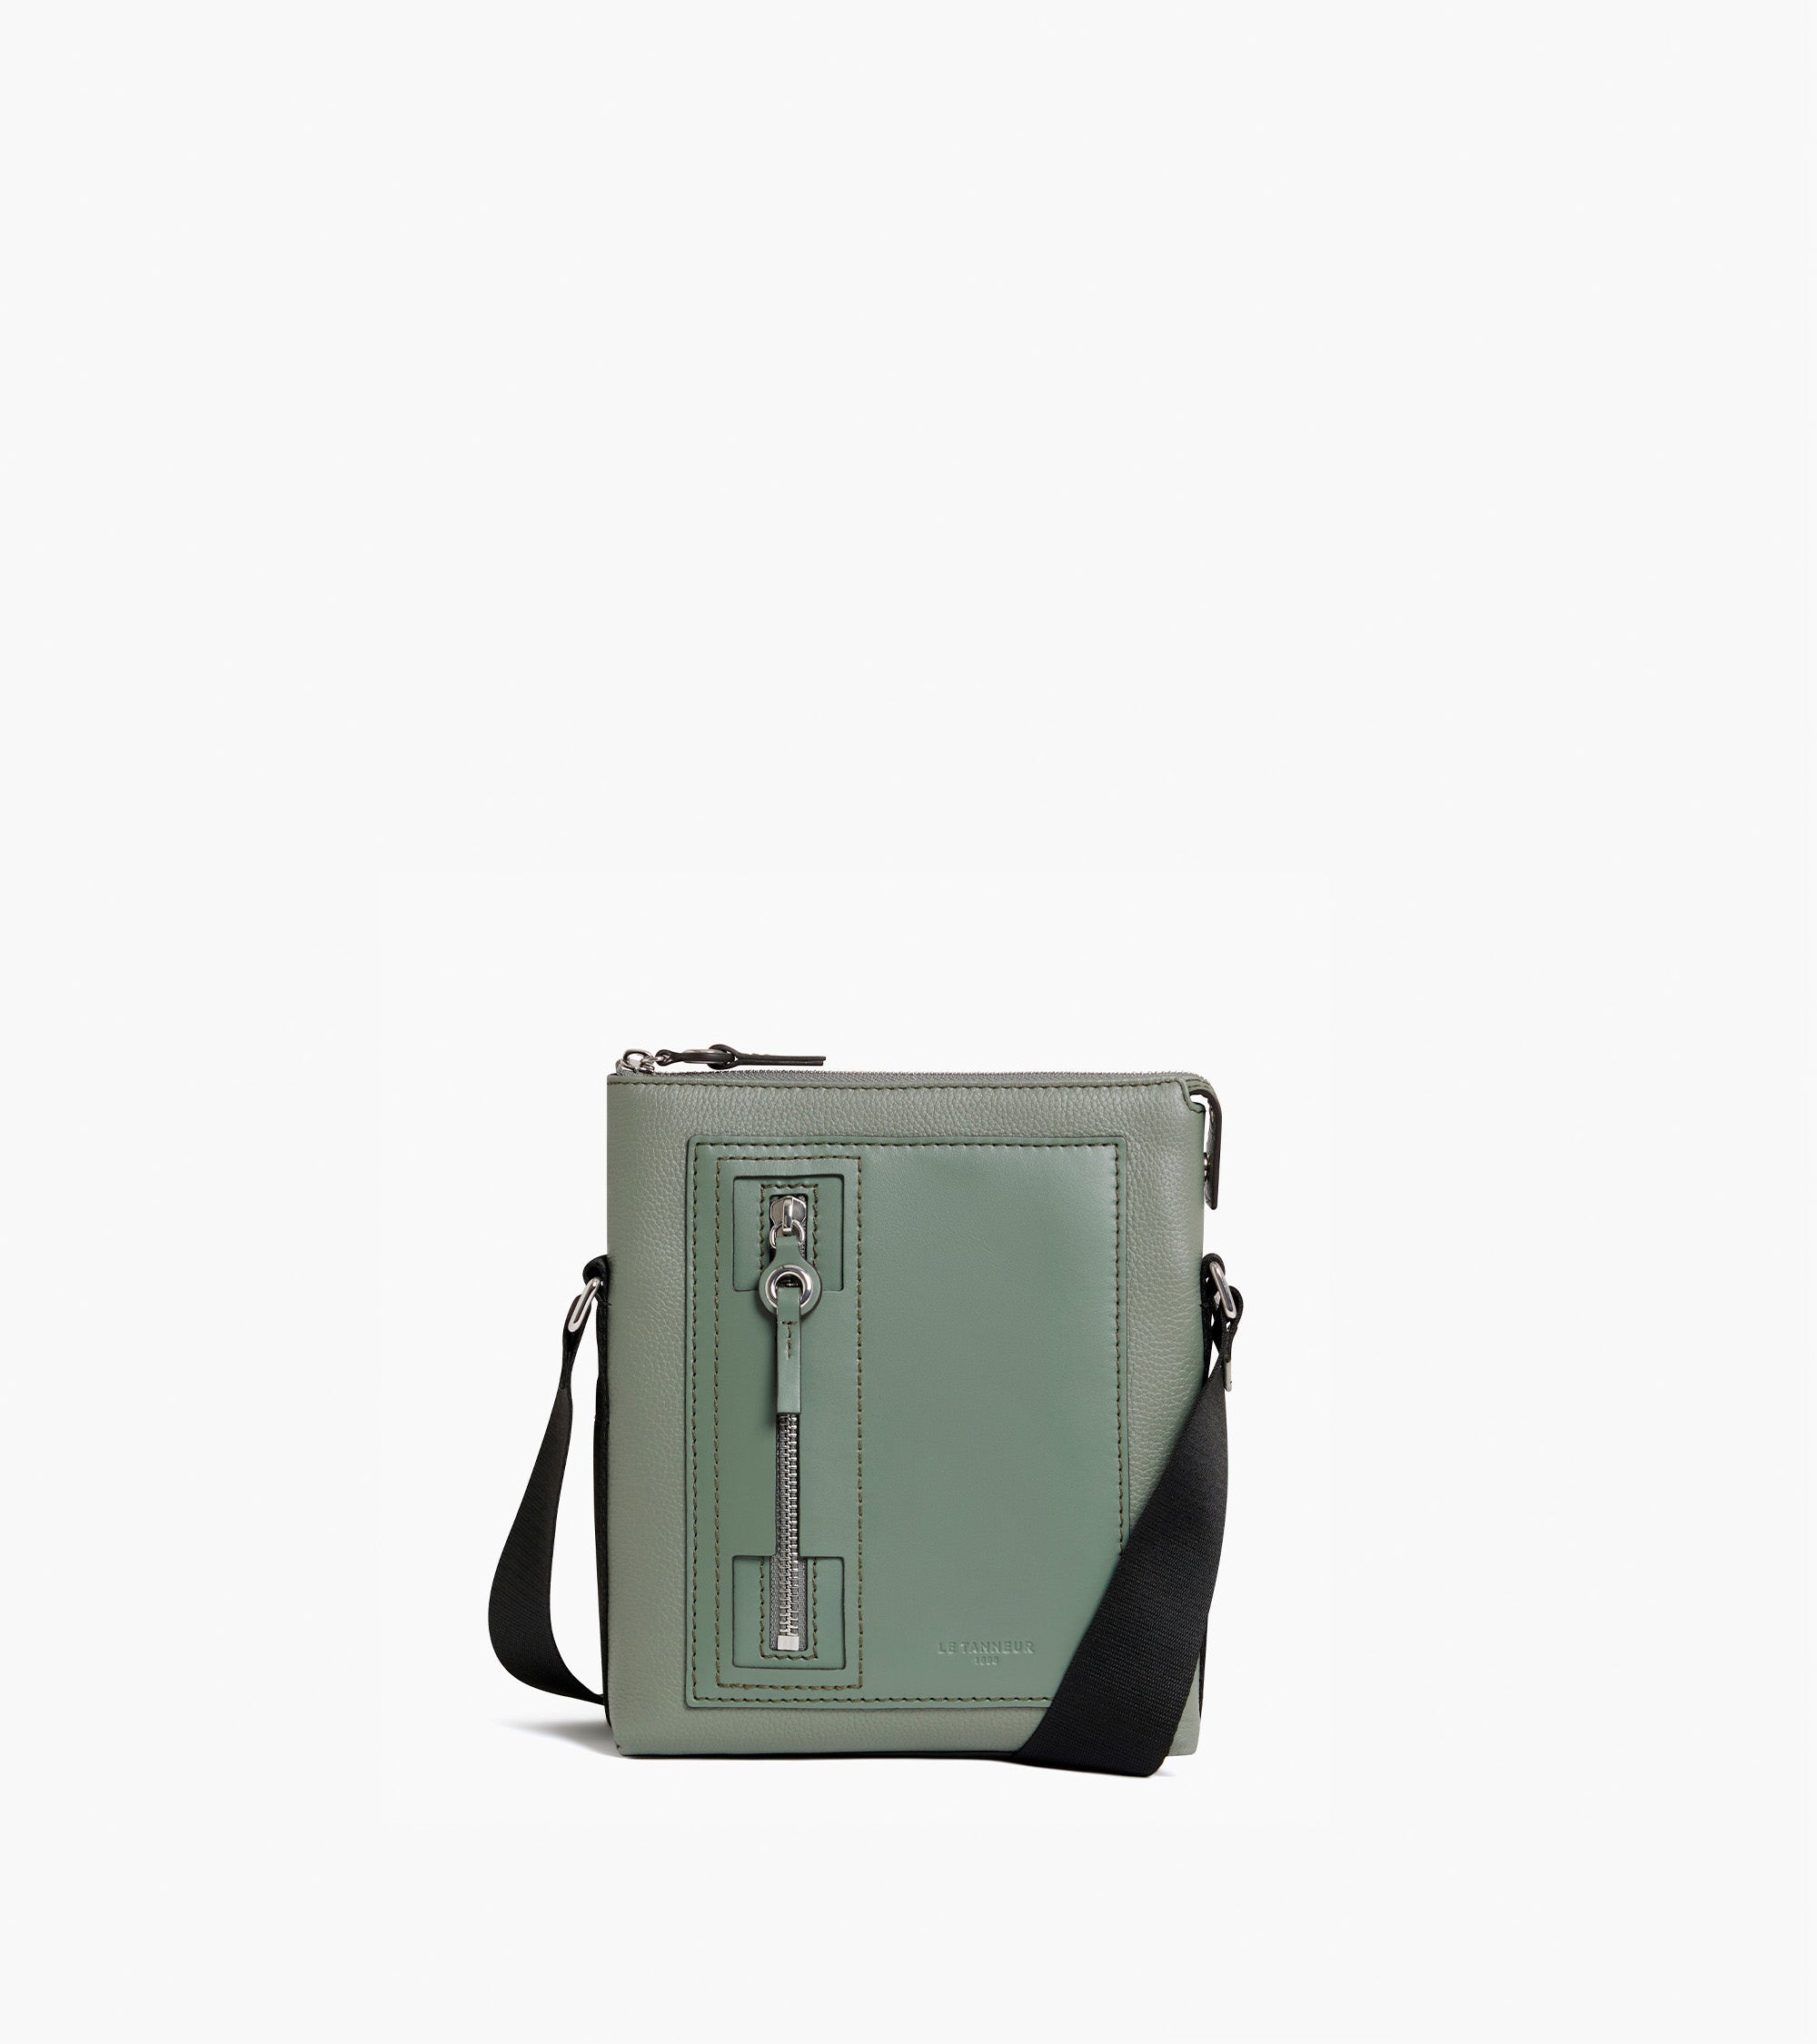 Alexis small leather shoulder bag